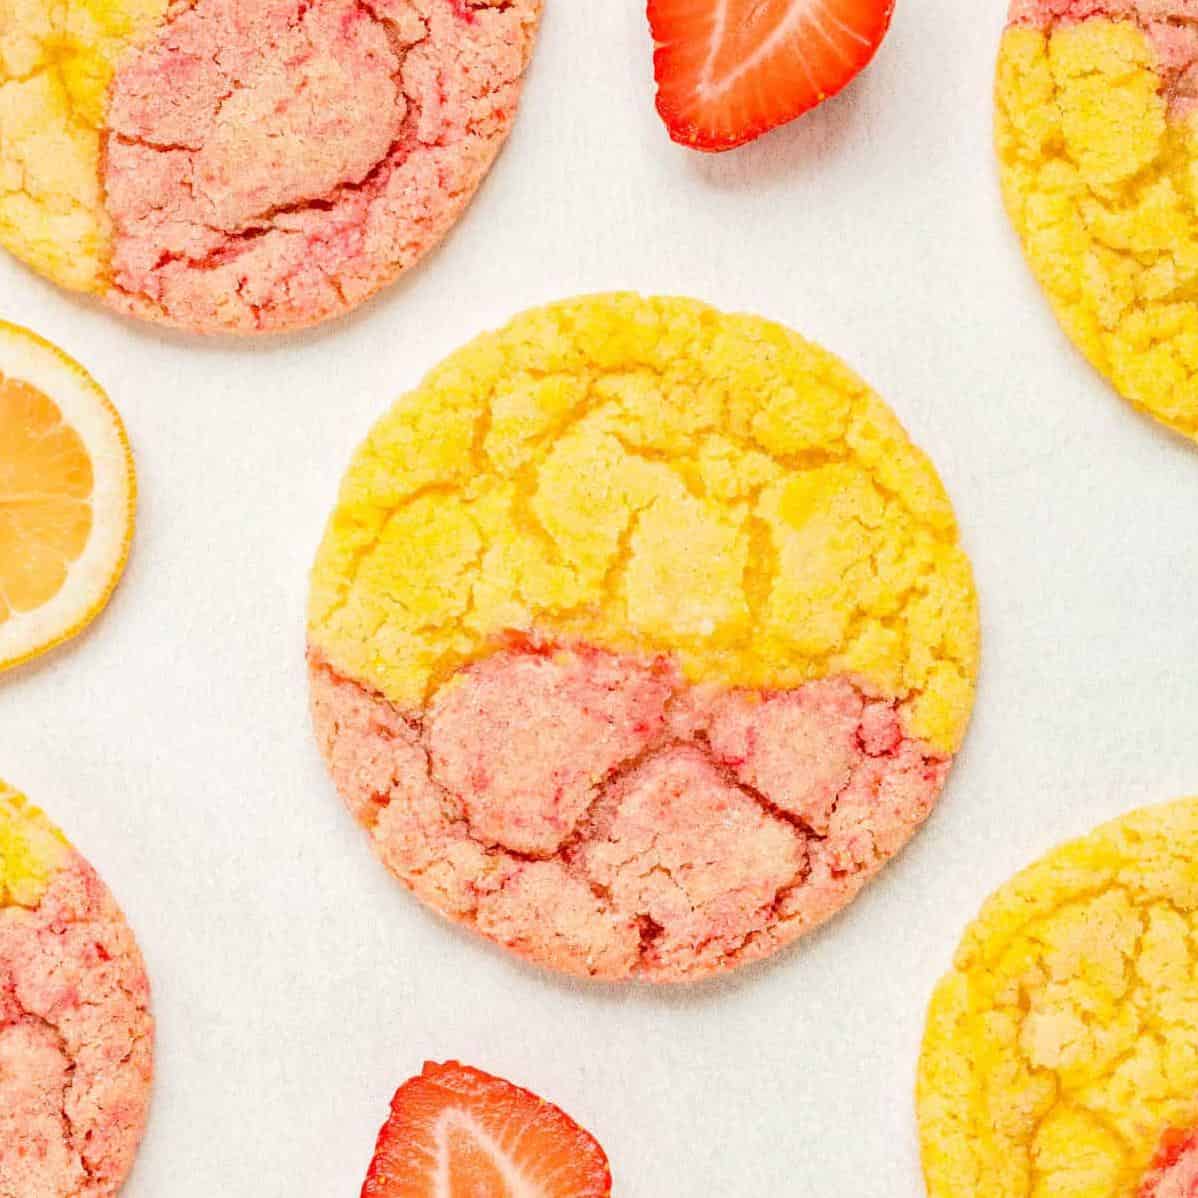  The bright pink hue of these cookies makes them a fun addition to any dessert table.